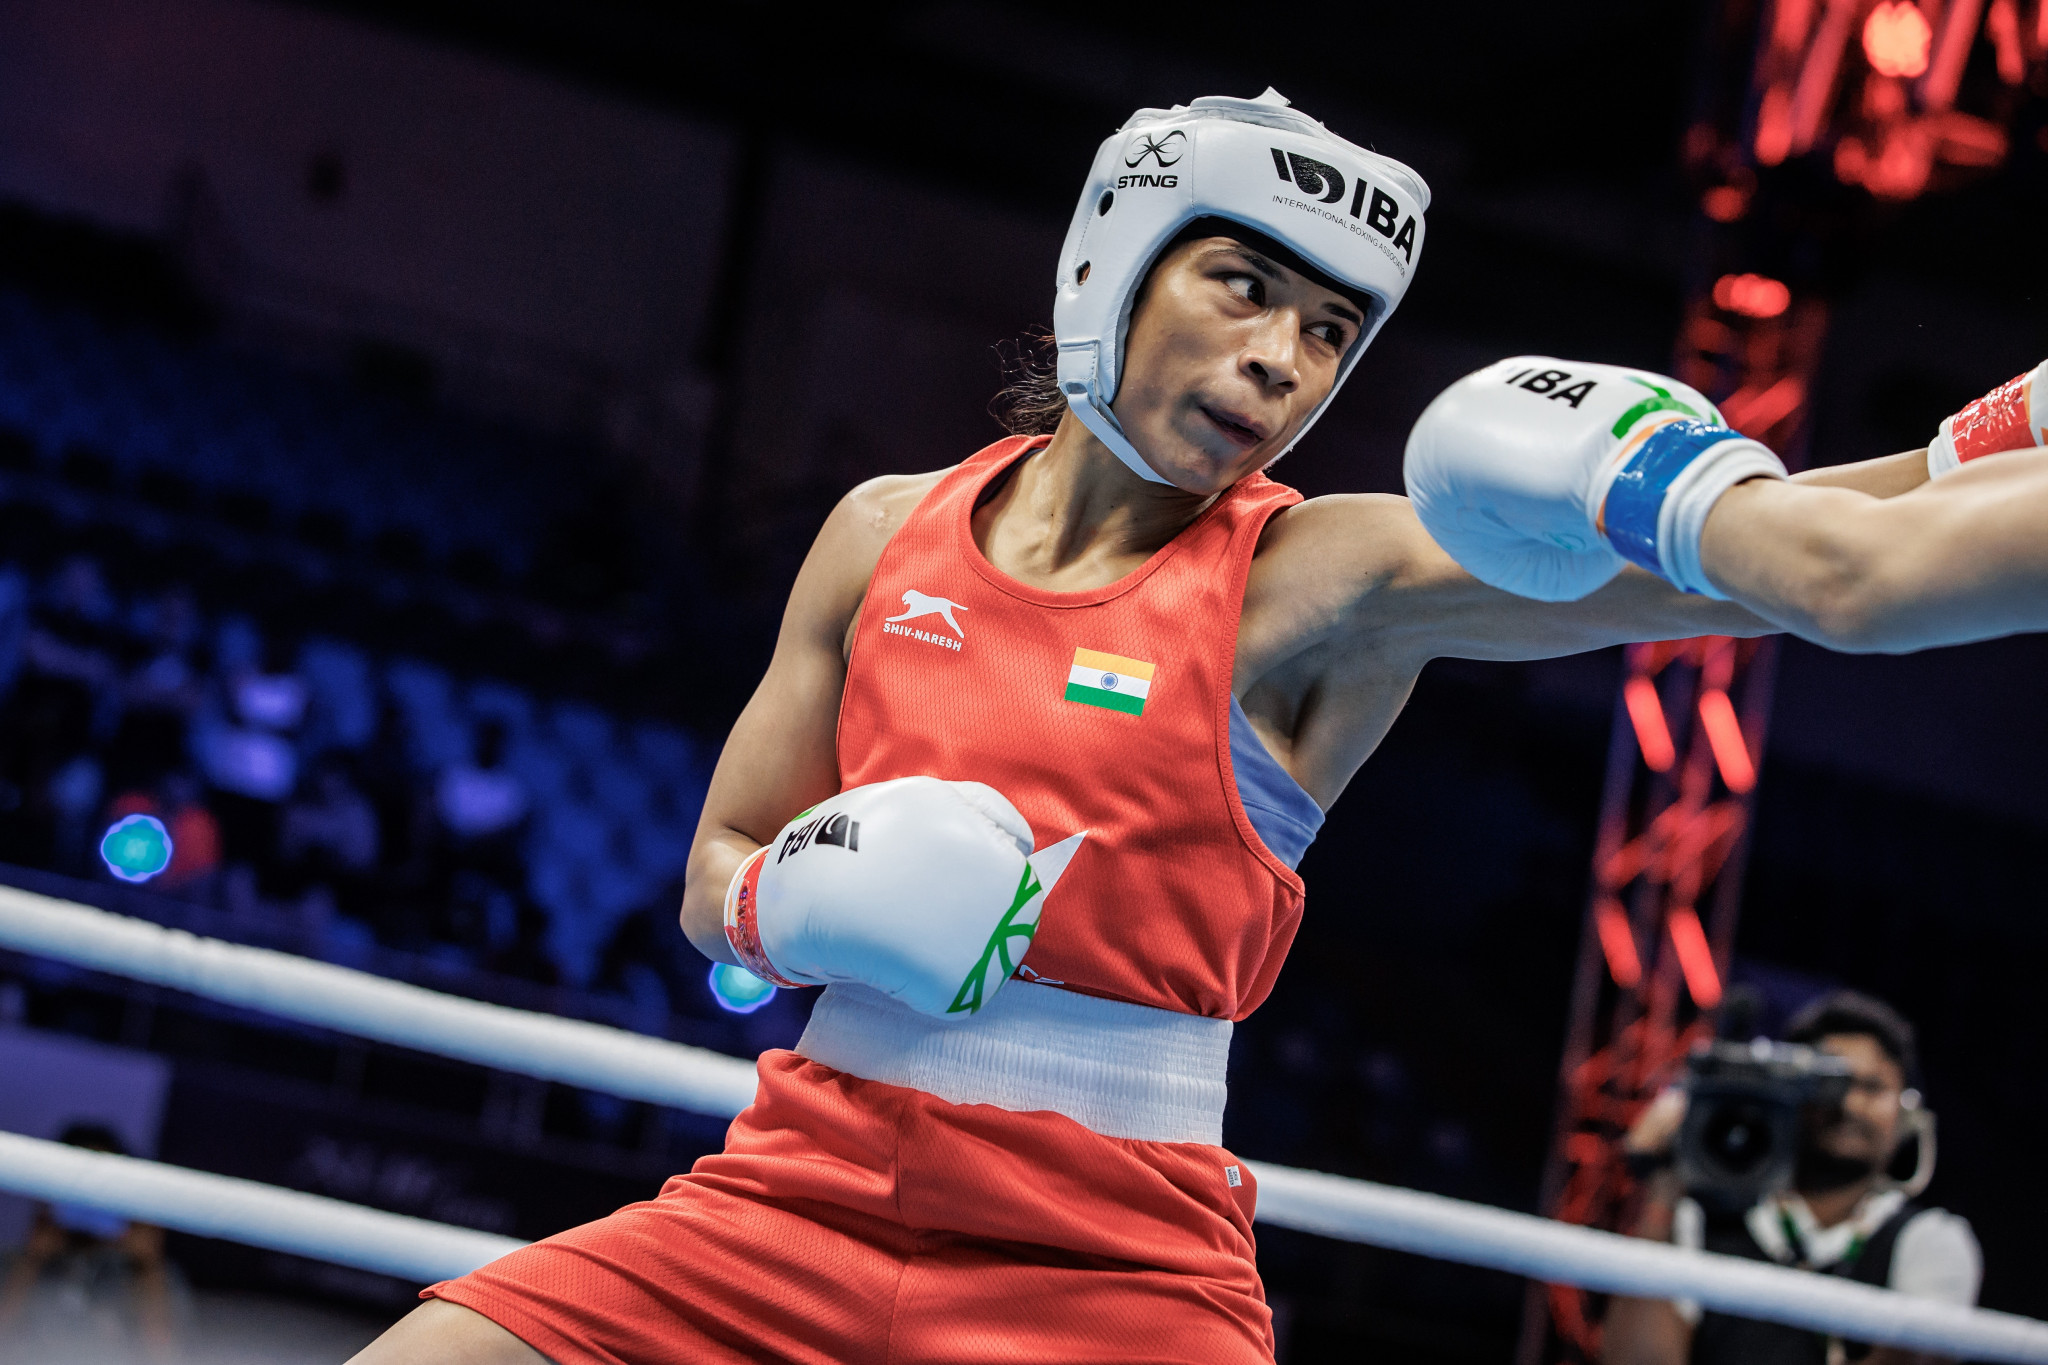 World champion Zareen Nikhat delivered India's first win of the day in the light flyweight class ©IBA